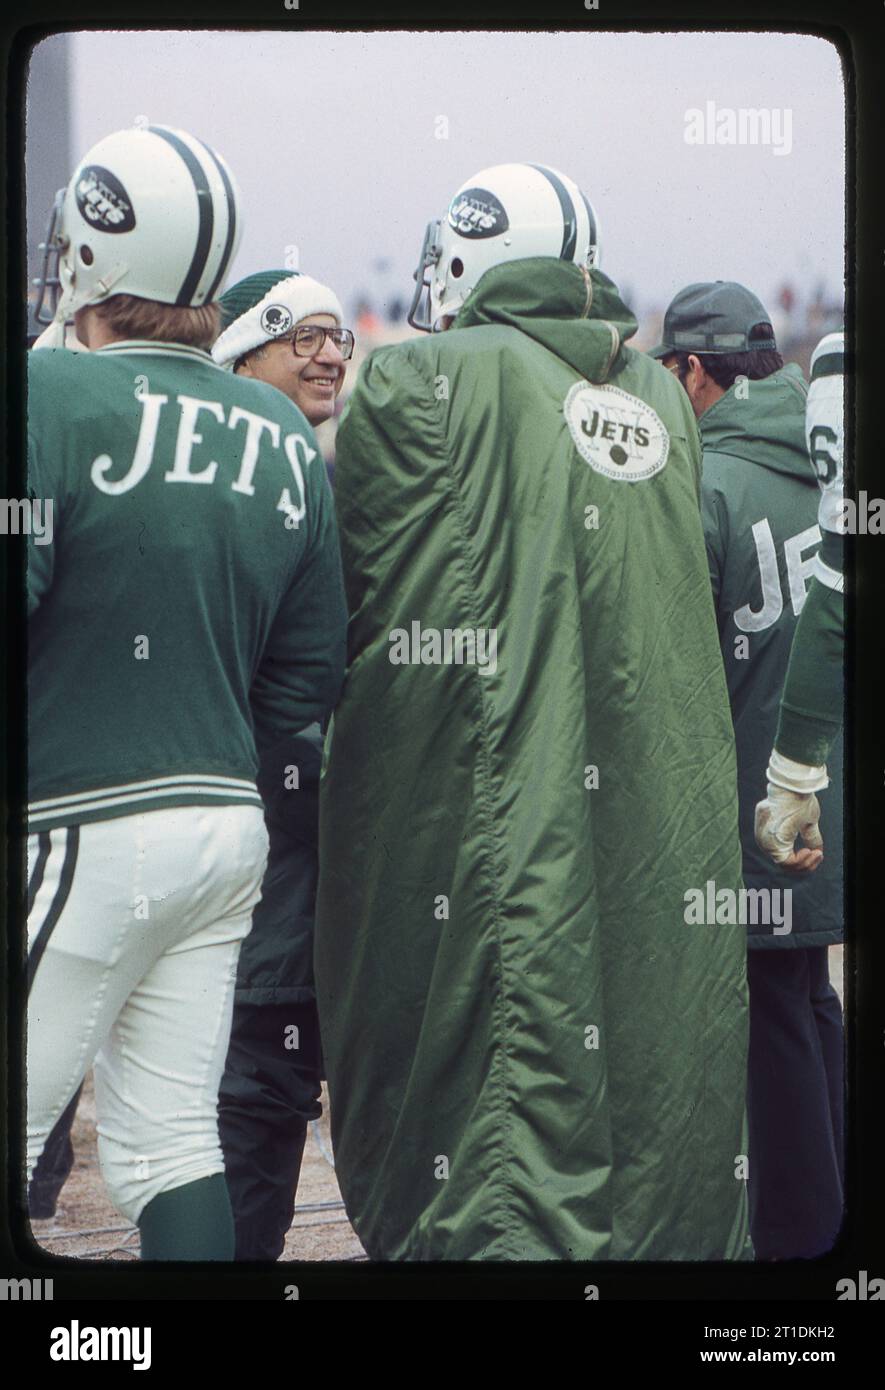 Orthopedic surgeon and sports medicine pioneer Dr. James Nicholas on the sidelines of a 1978 New York Jets game. He was their team doctor. Stock Photo